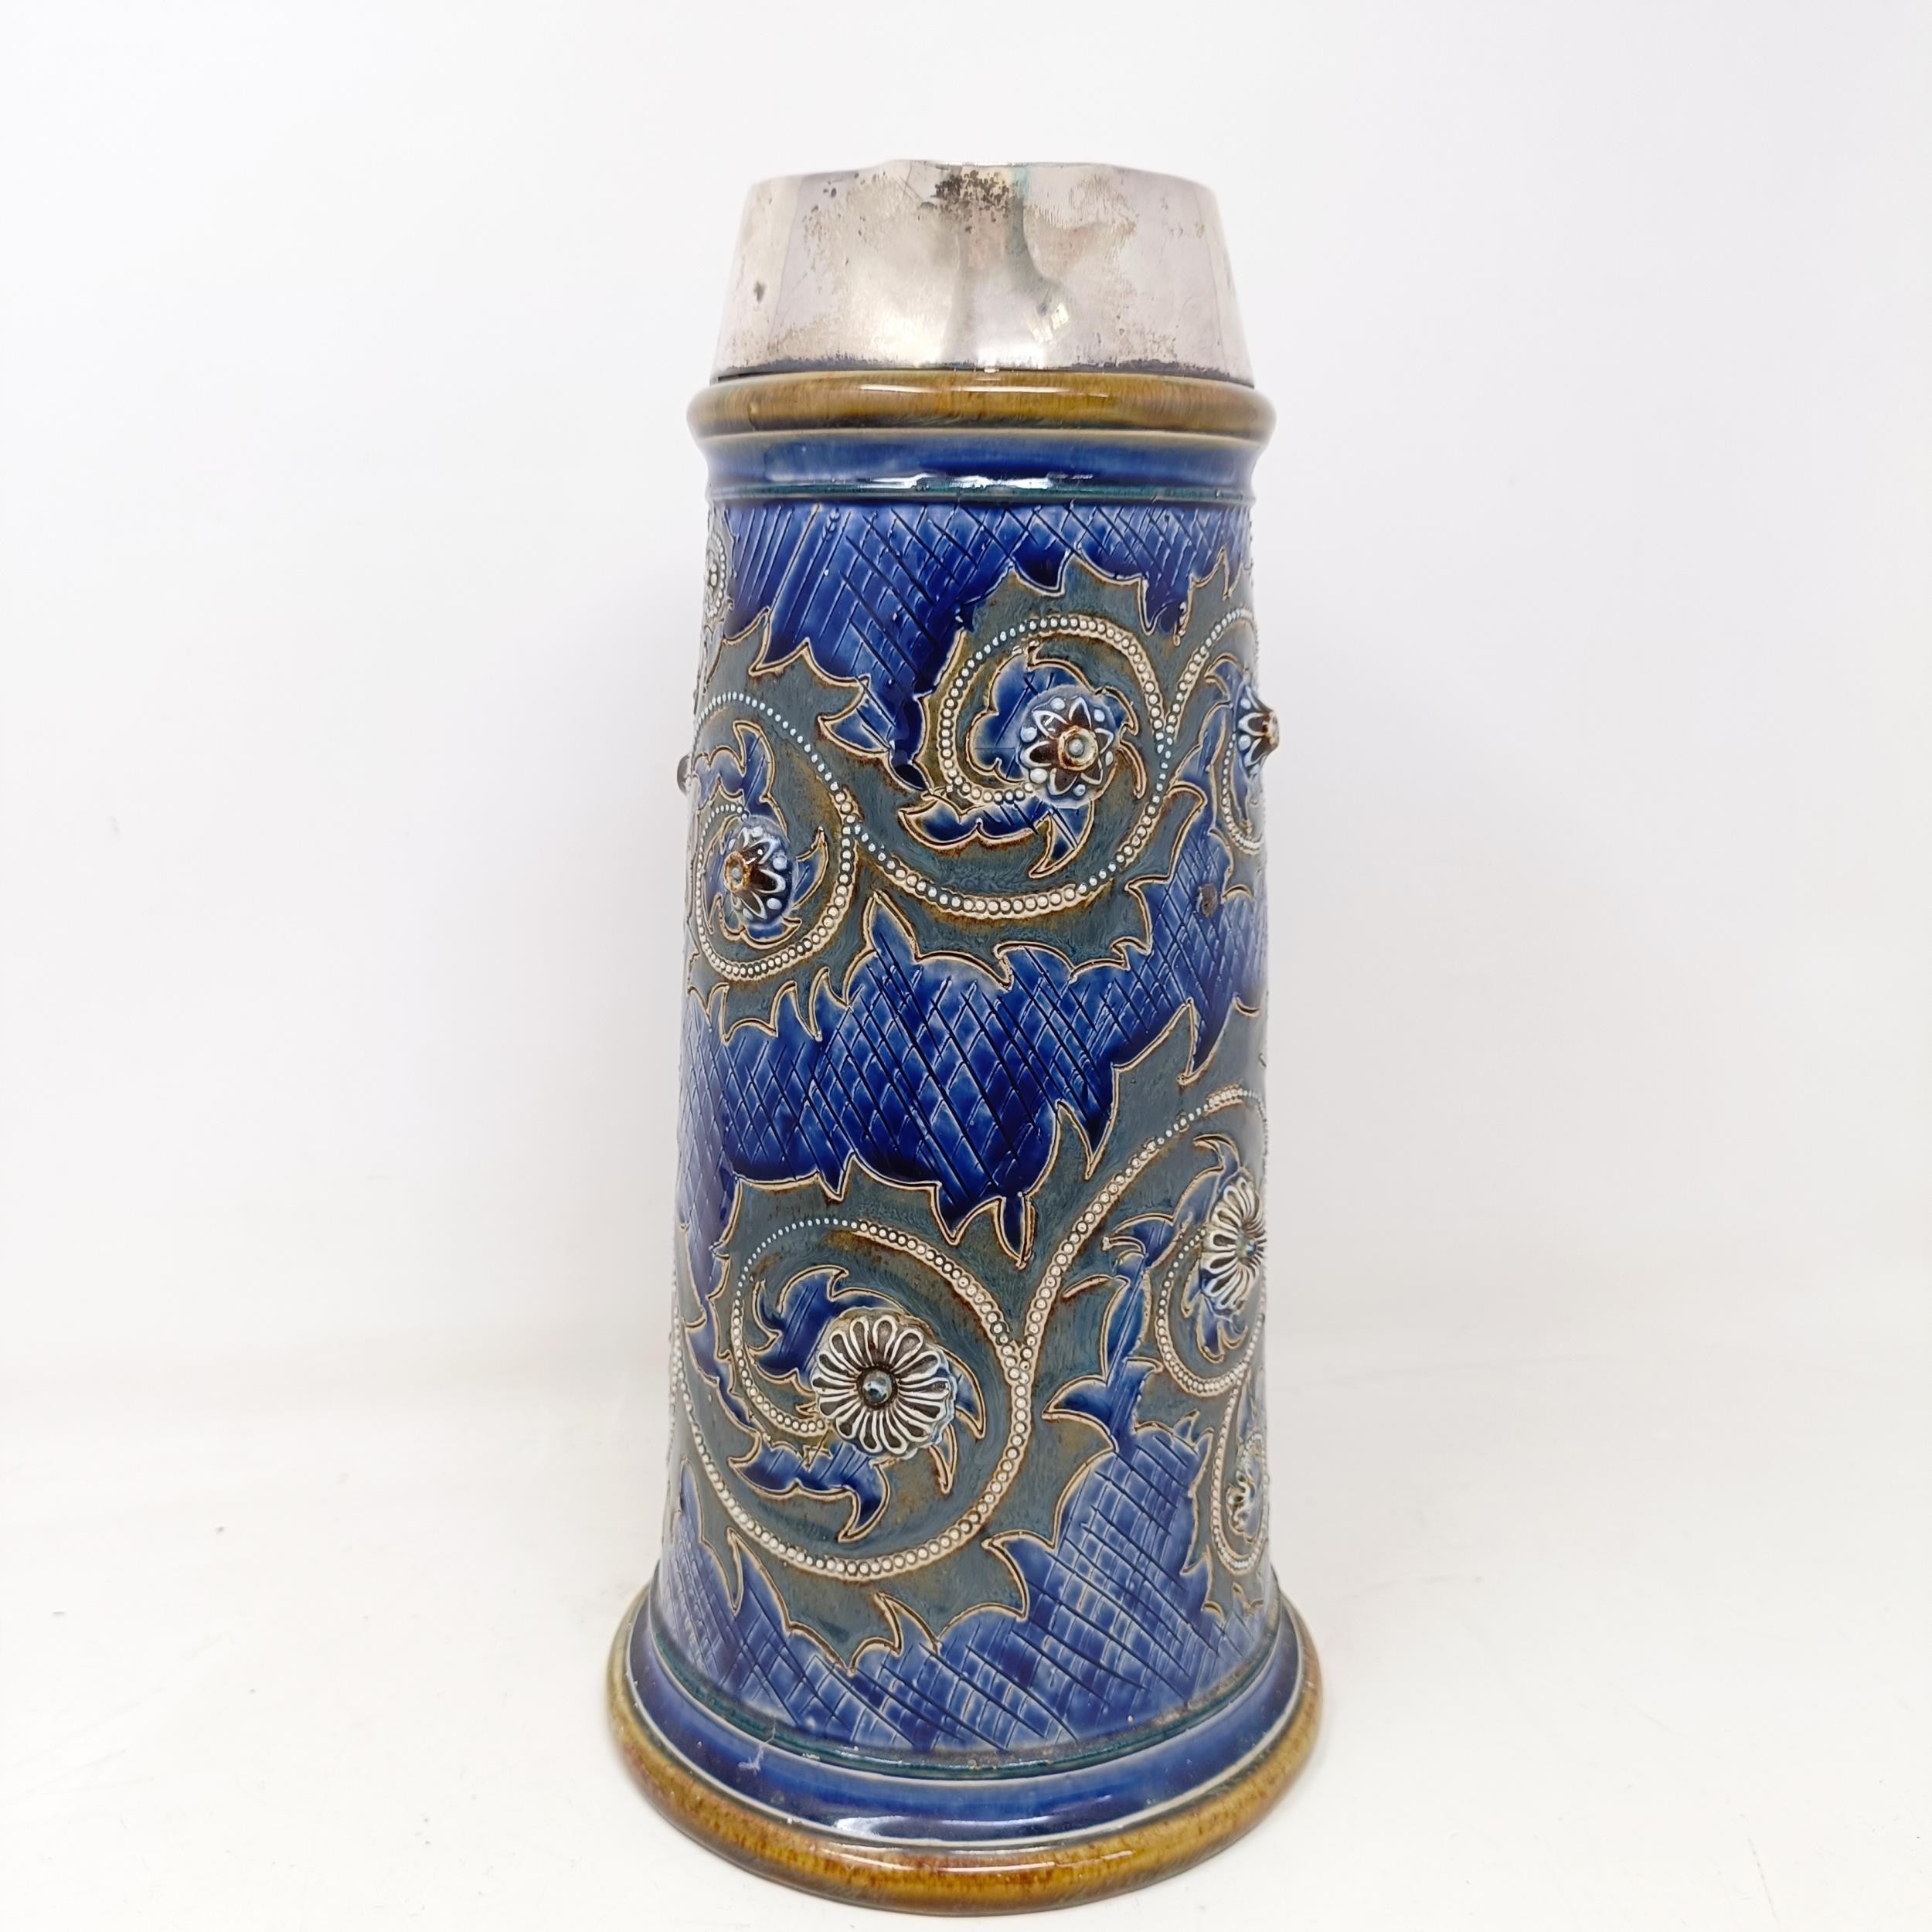 A Doulton Lambeth jug, by George Tinworth, decorated floral motifs, with a silver mount, marks - Image 6 of 11